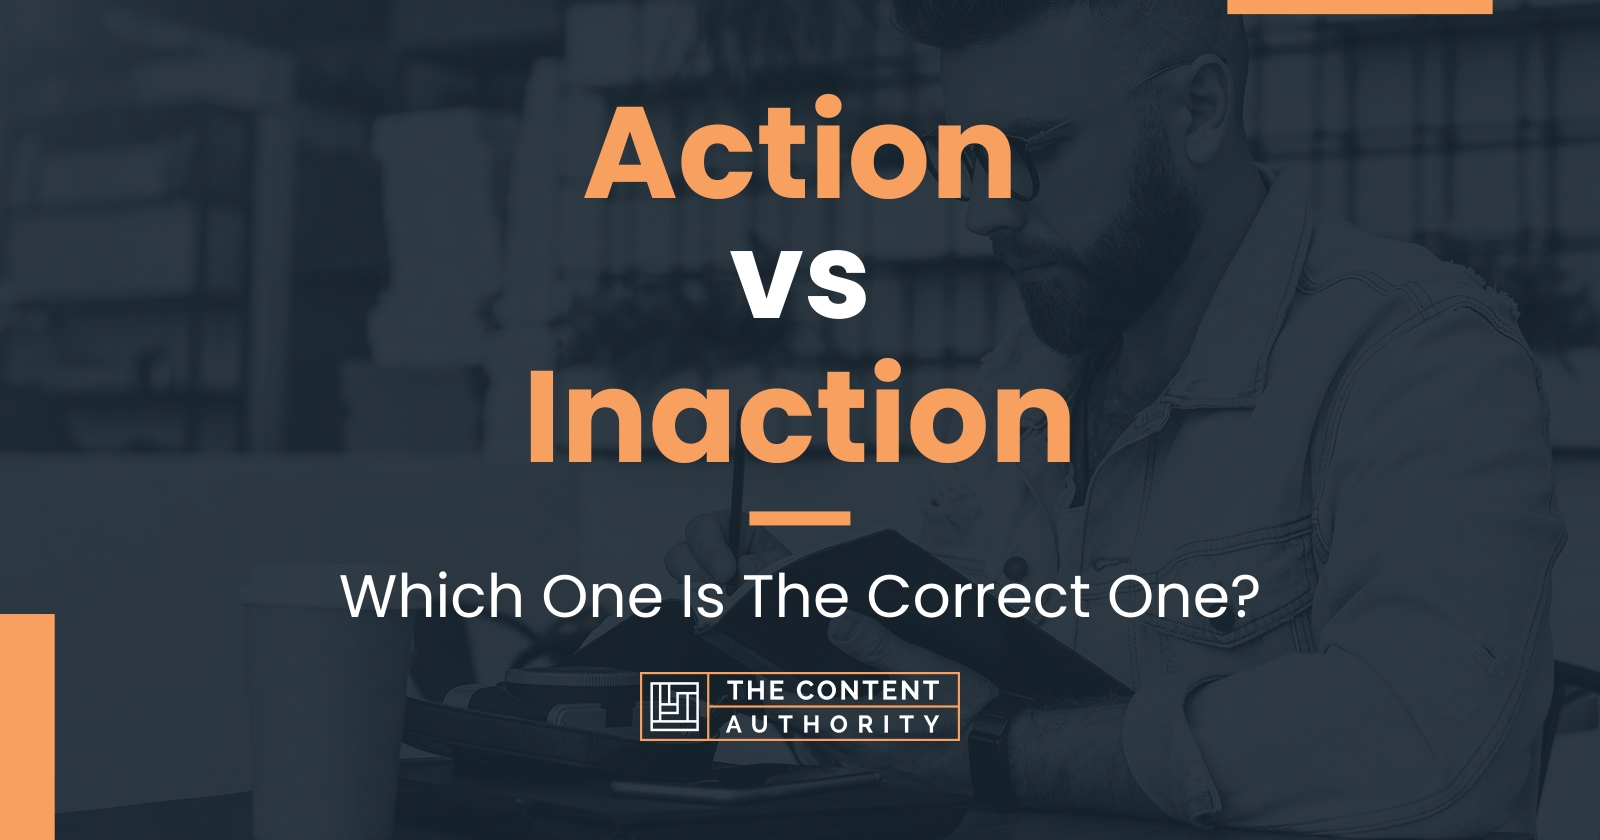 Action vs Inaction: Which One Is The Correct One?